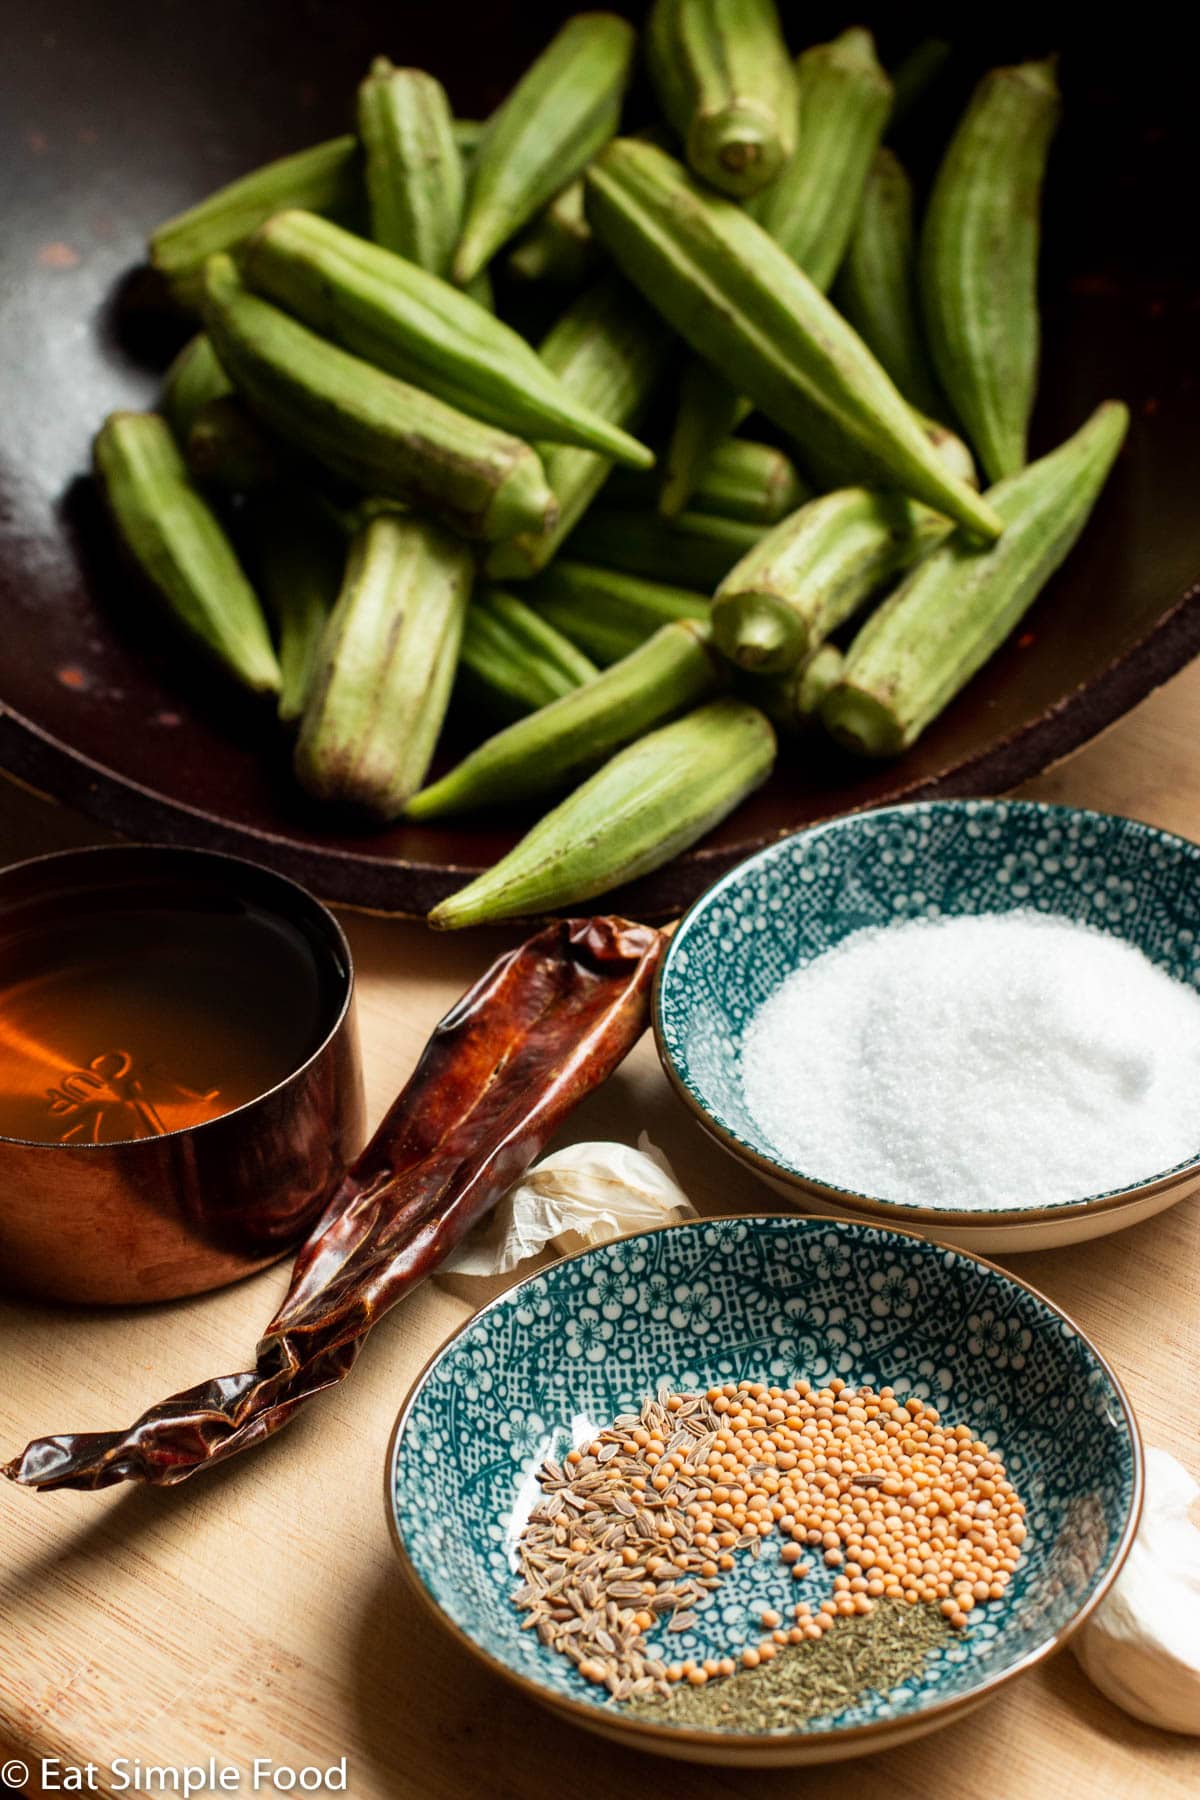 Ingredients on a wood cutting board: whole okra in brown bowl, dried red chile, garlic clove, olive oil container, salt, and small blue spice container with mustard seeds, dill seeds, and dried dill.